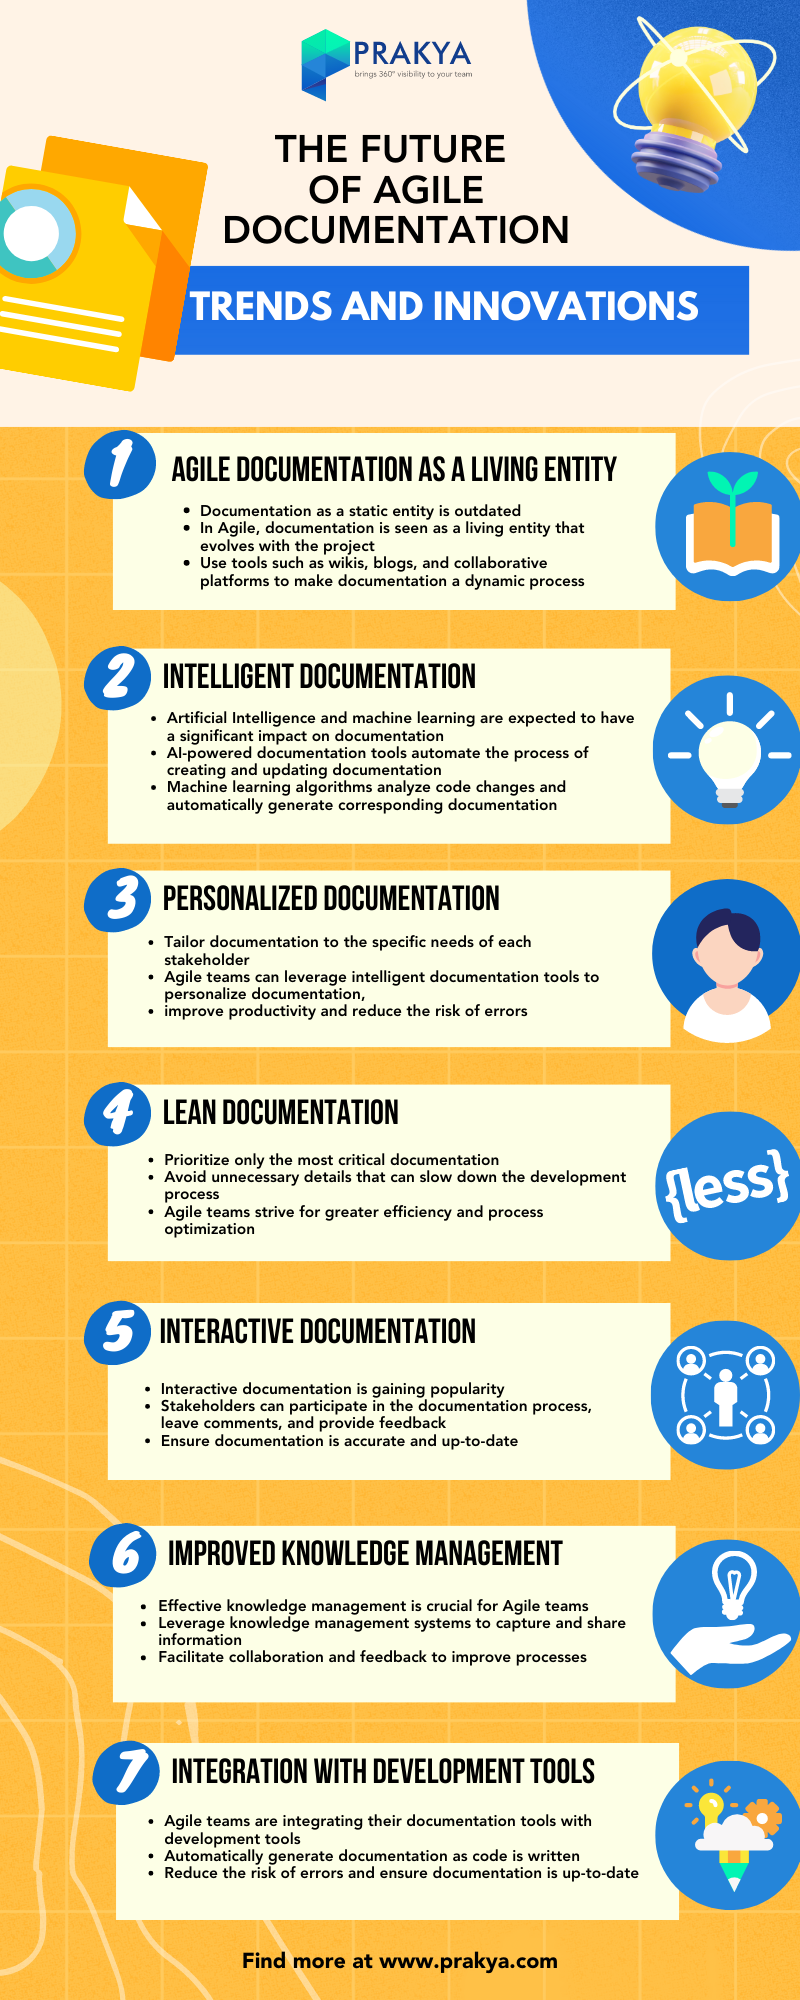 This is Prakya's infographic about the future of agile documentation trends and innovations